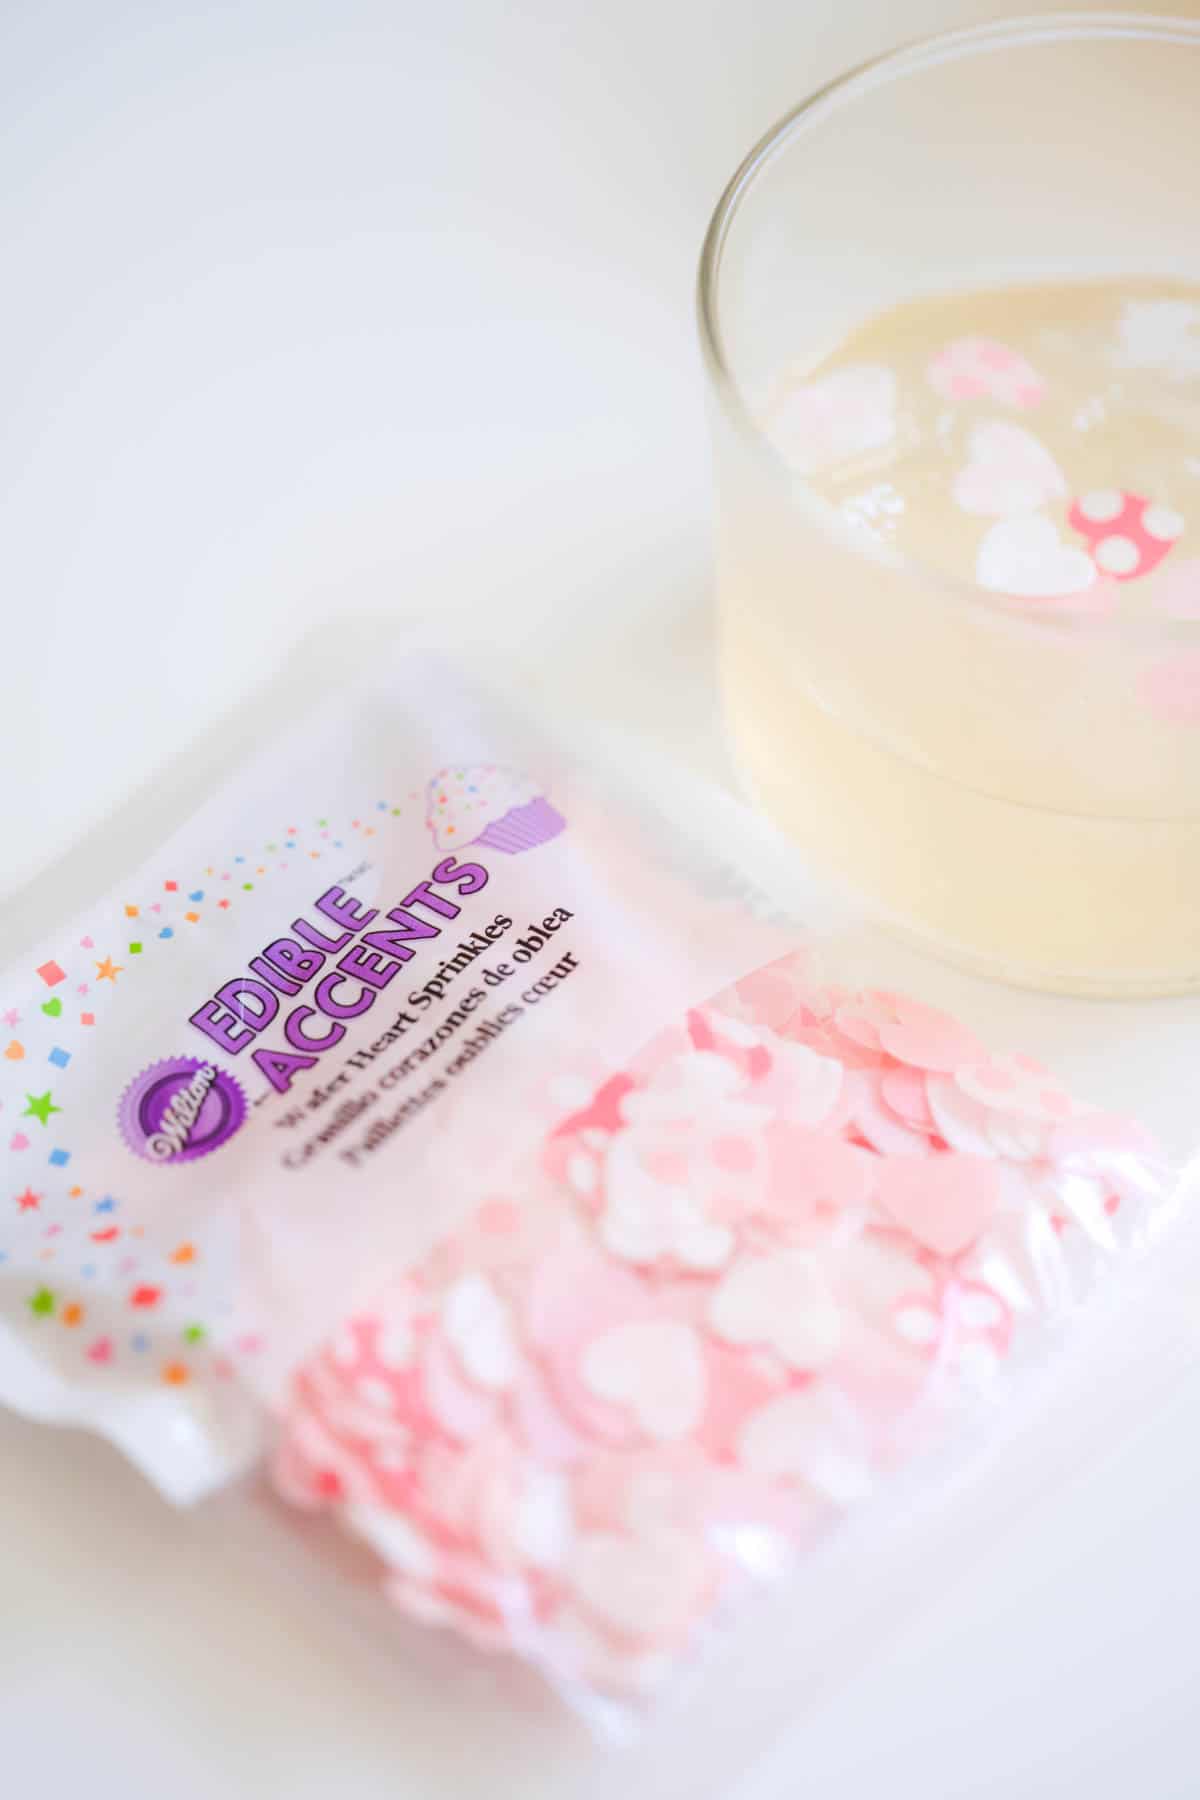 A package of edible confetti on a table next to a glass with a drink topped with the heart confetti.